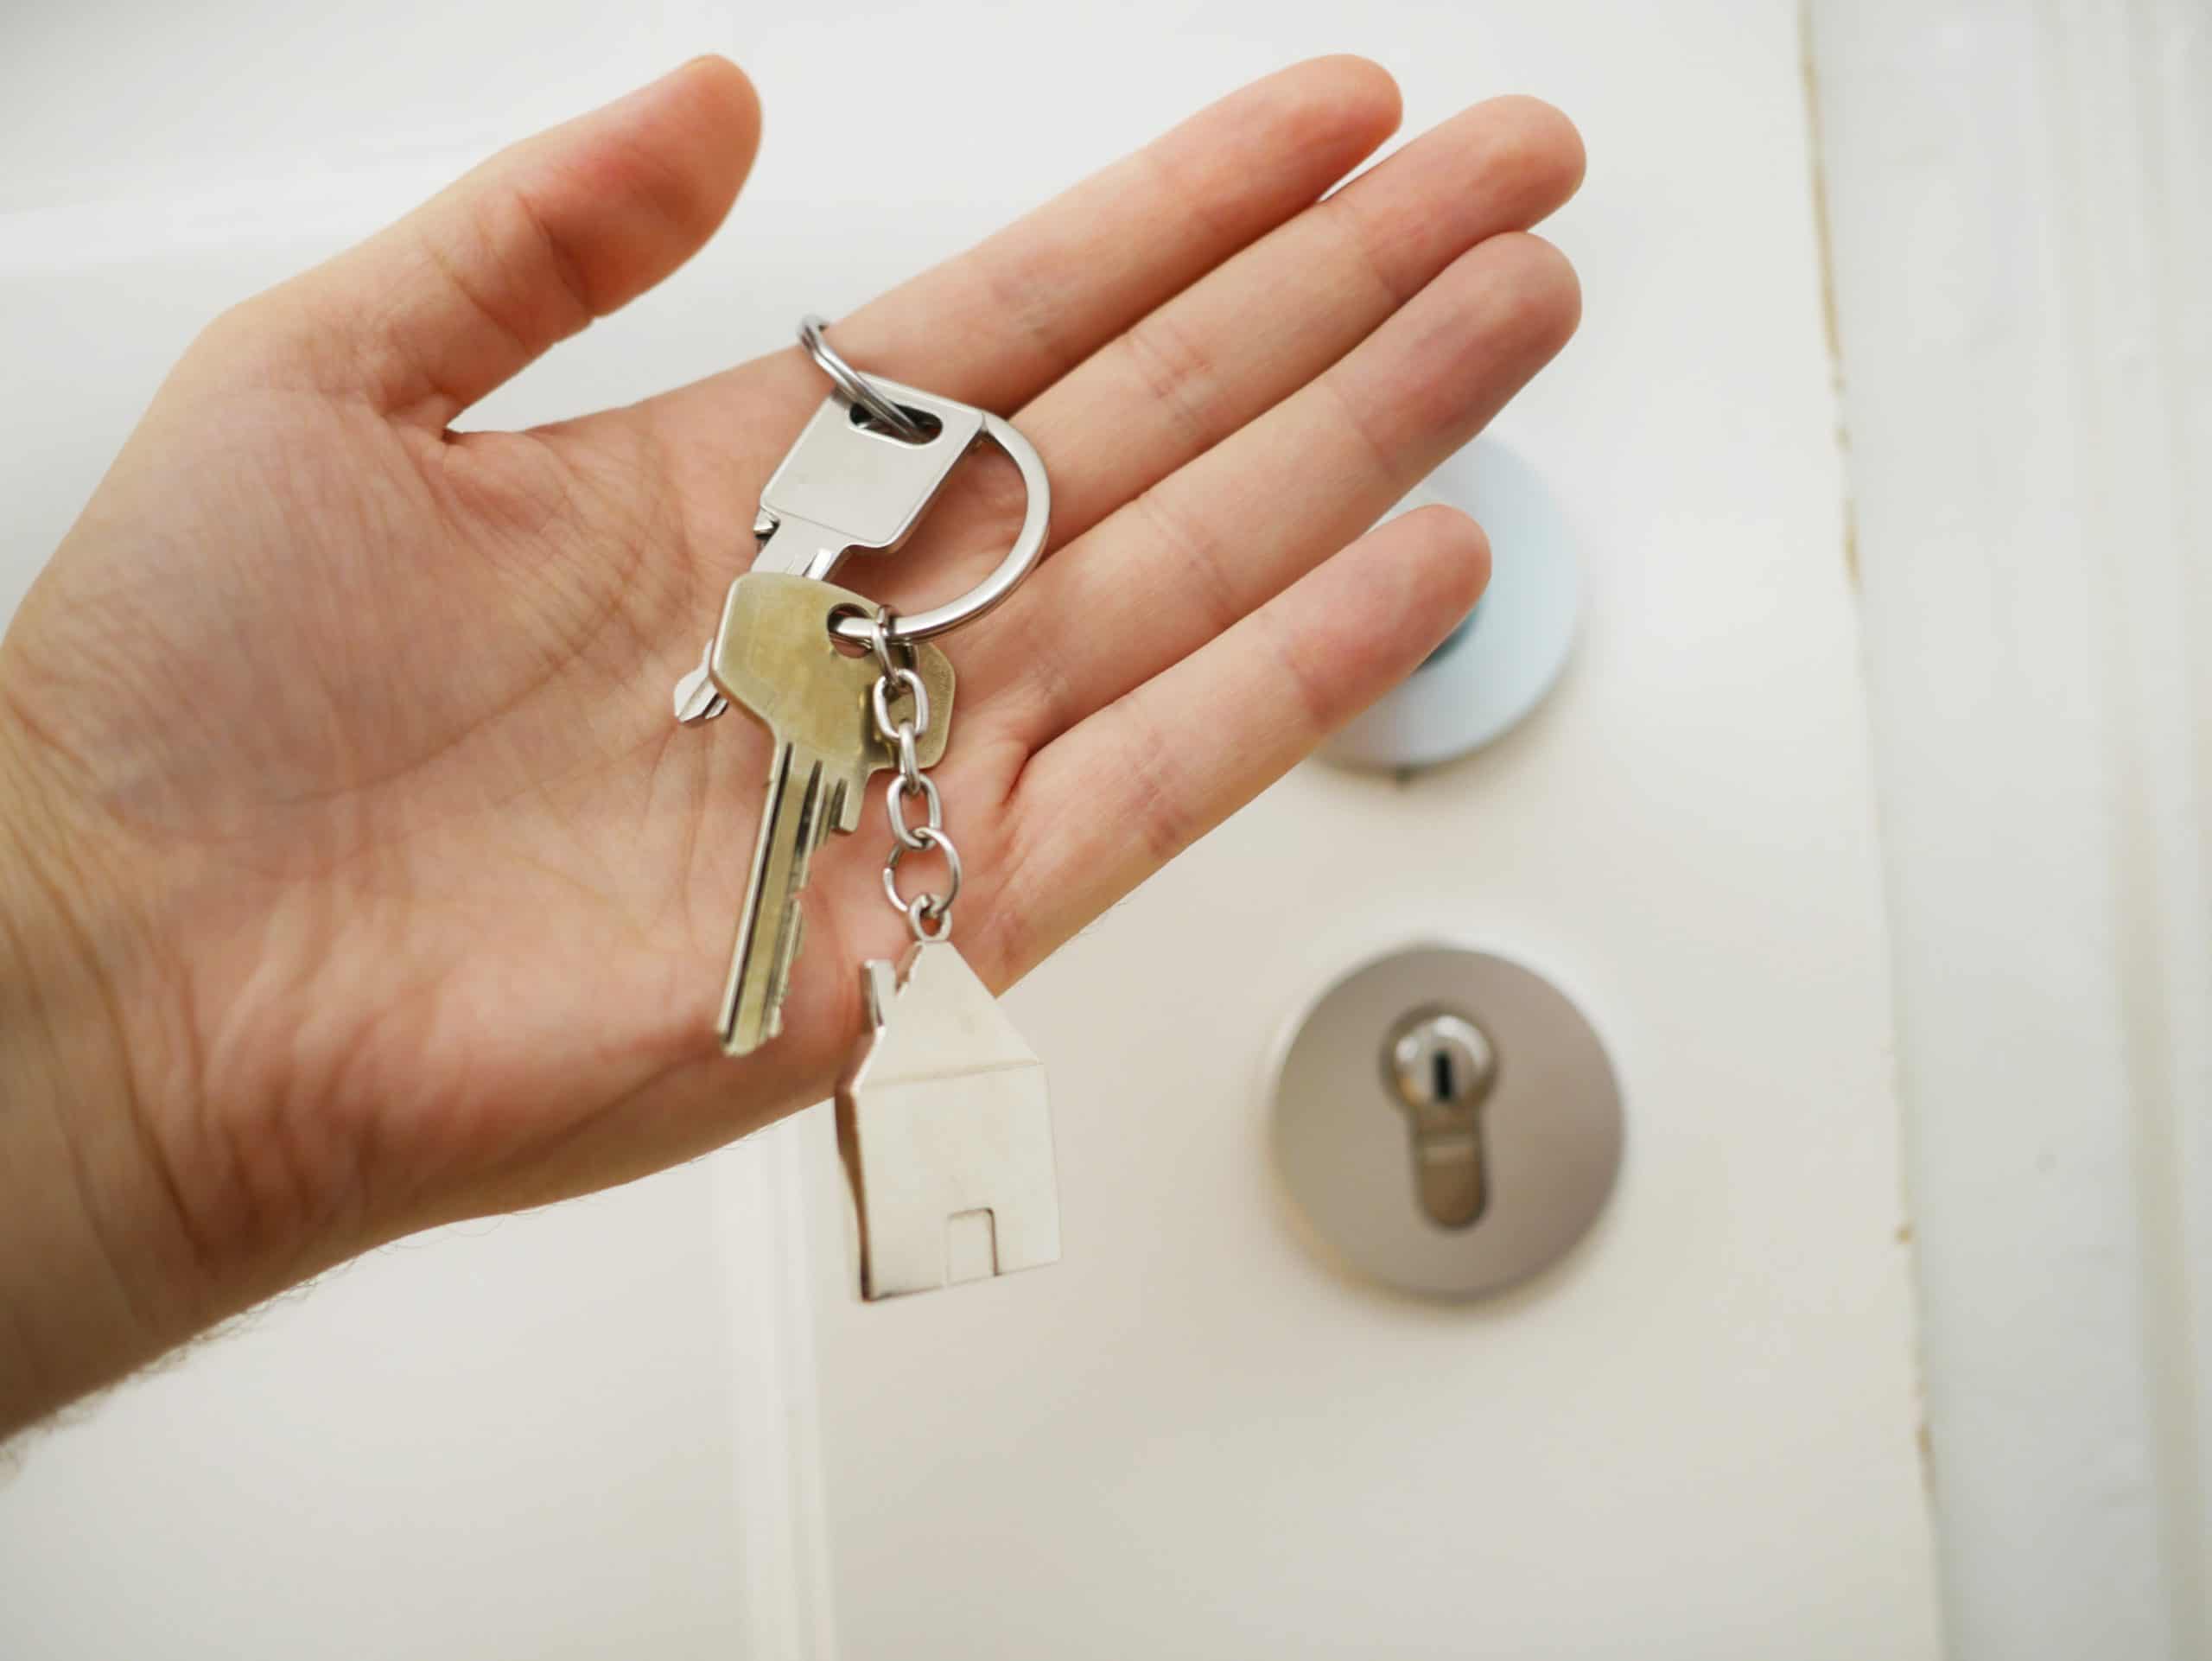 Cash for Keys: What Landlords Need to Know